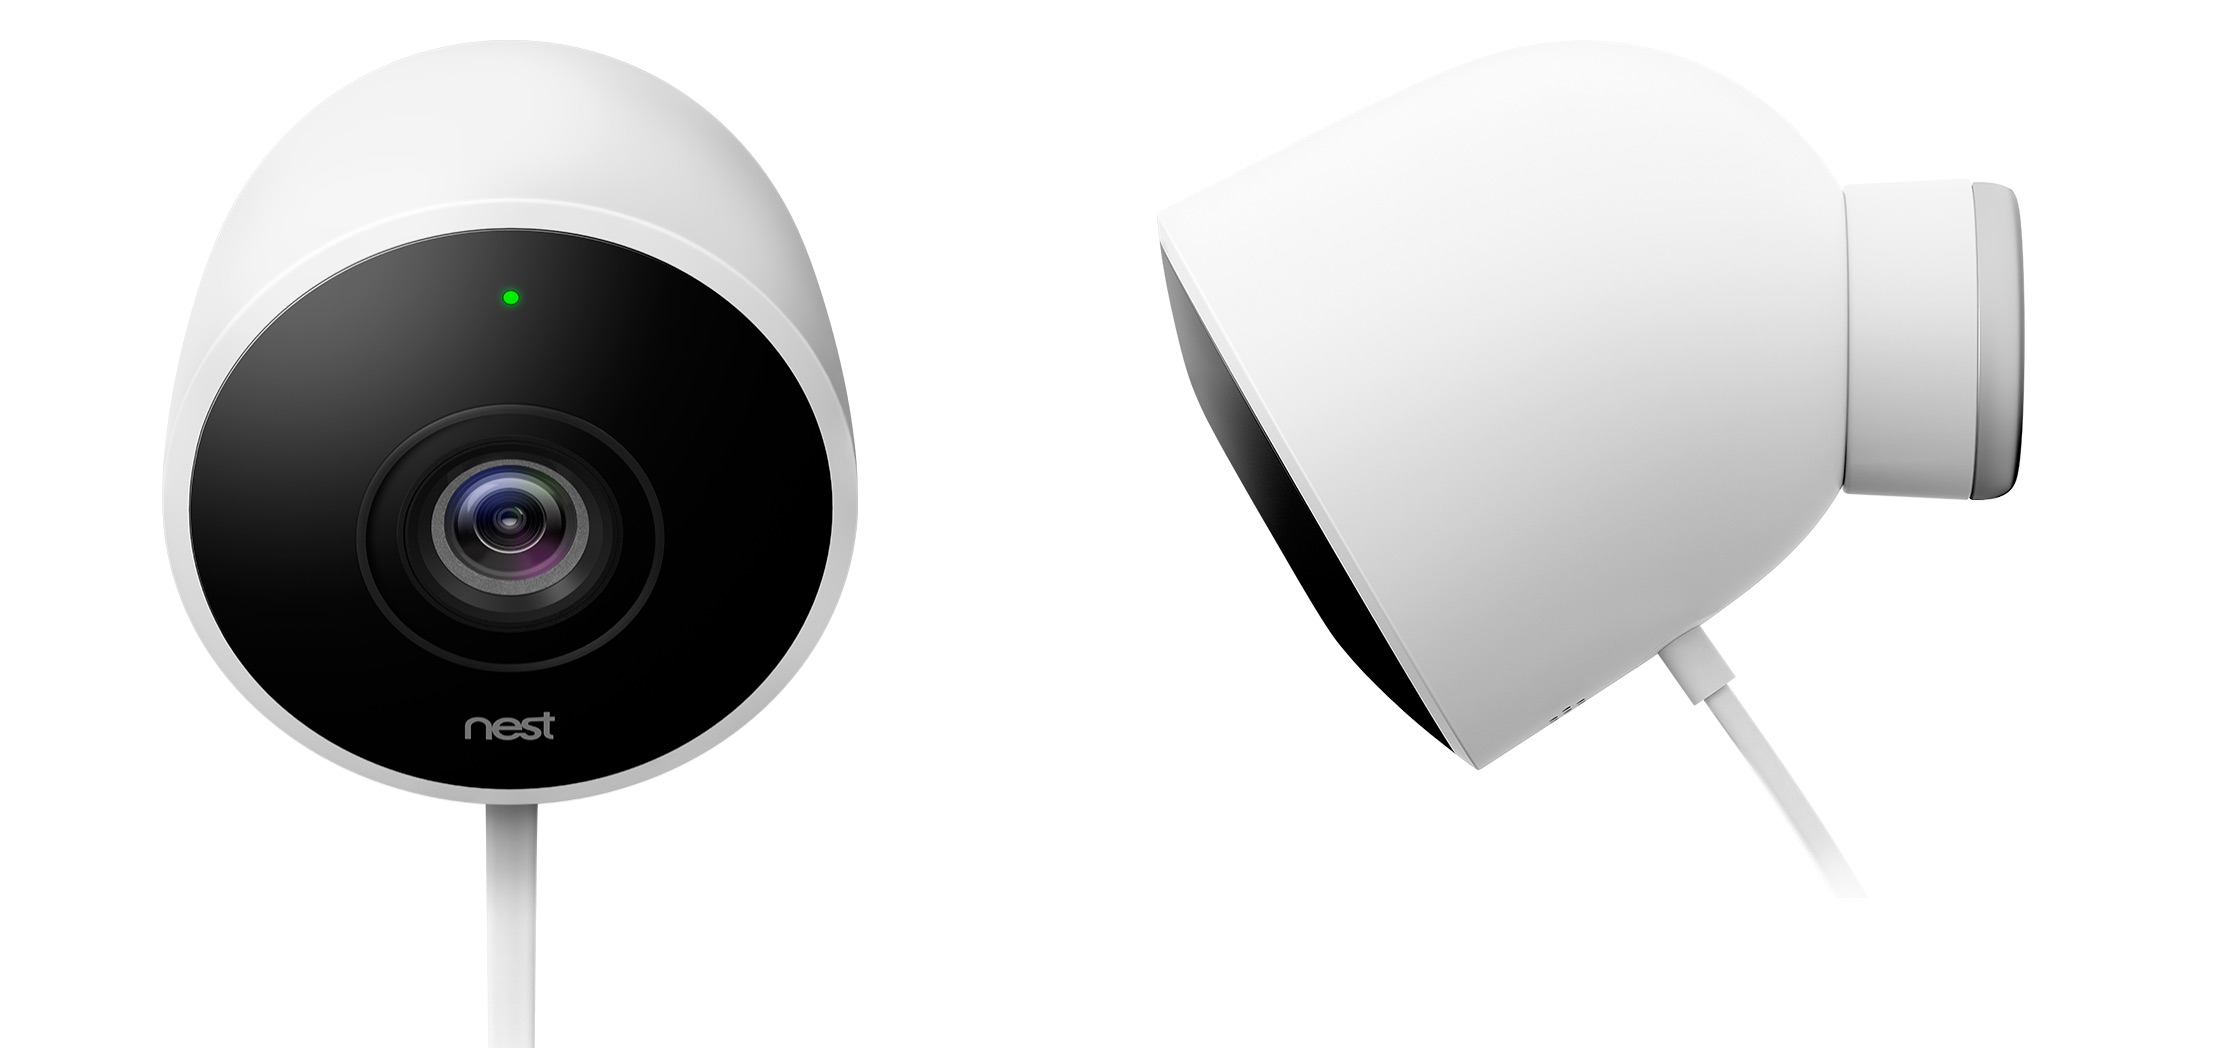 Nest Adds An Outside Security Camera To Its Lineup